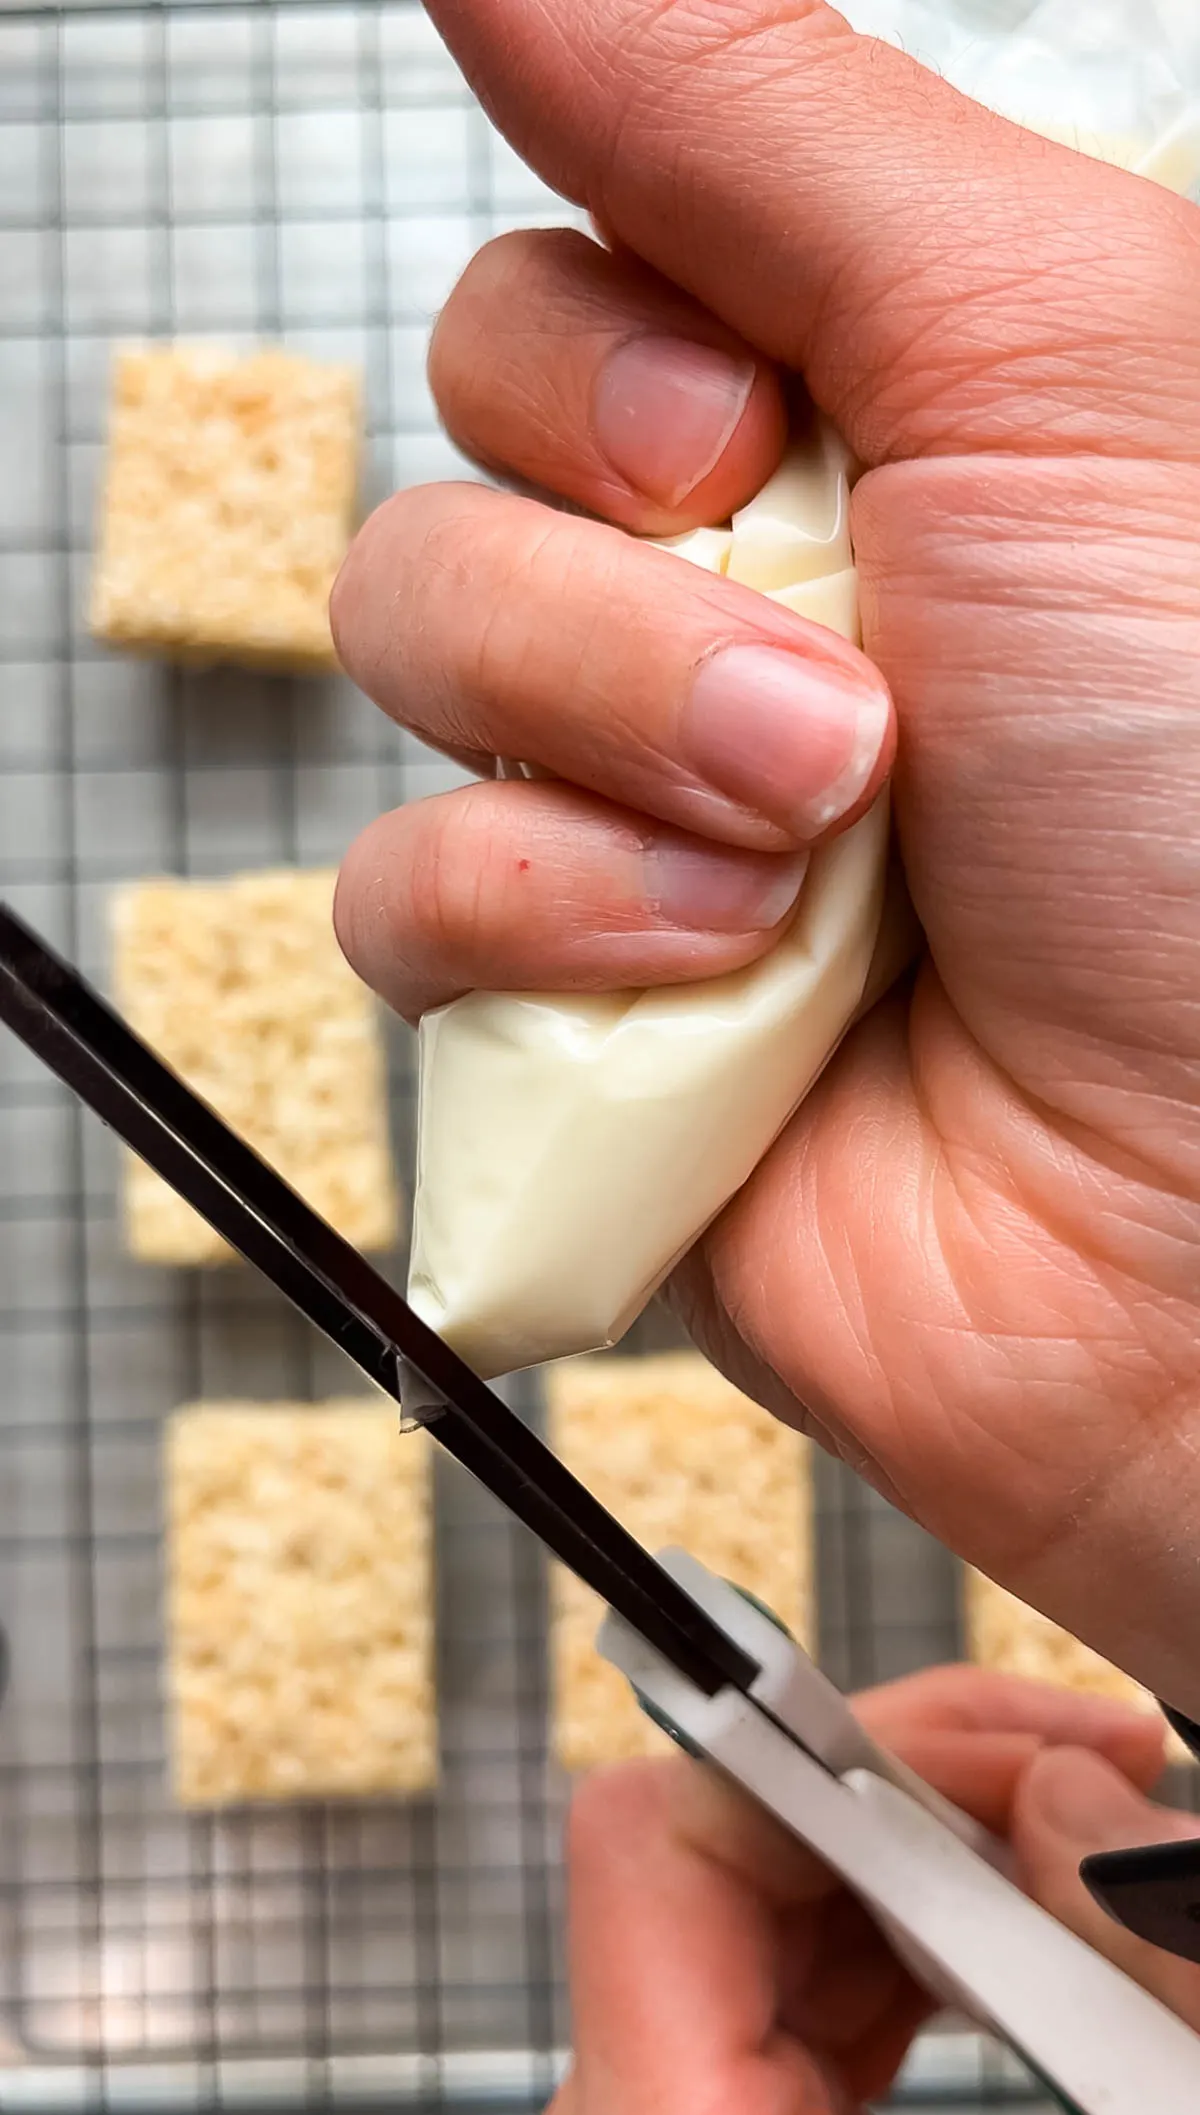 Woman cuts piping bag full of white chocolate with pair of scissors.